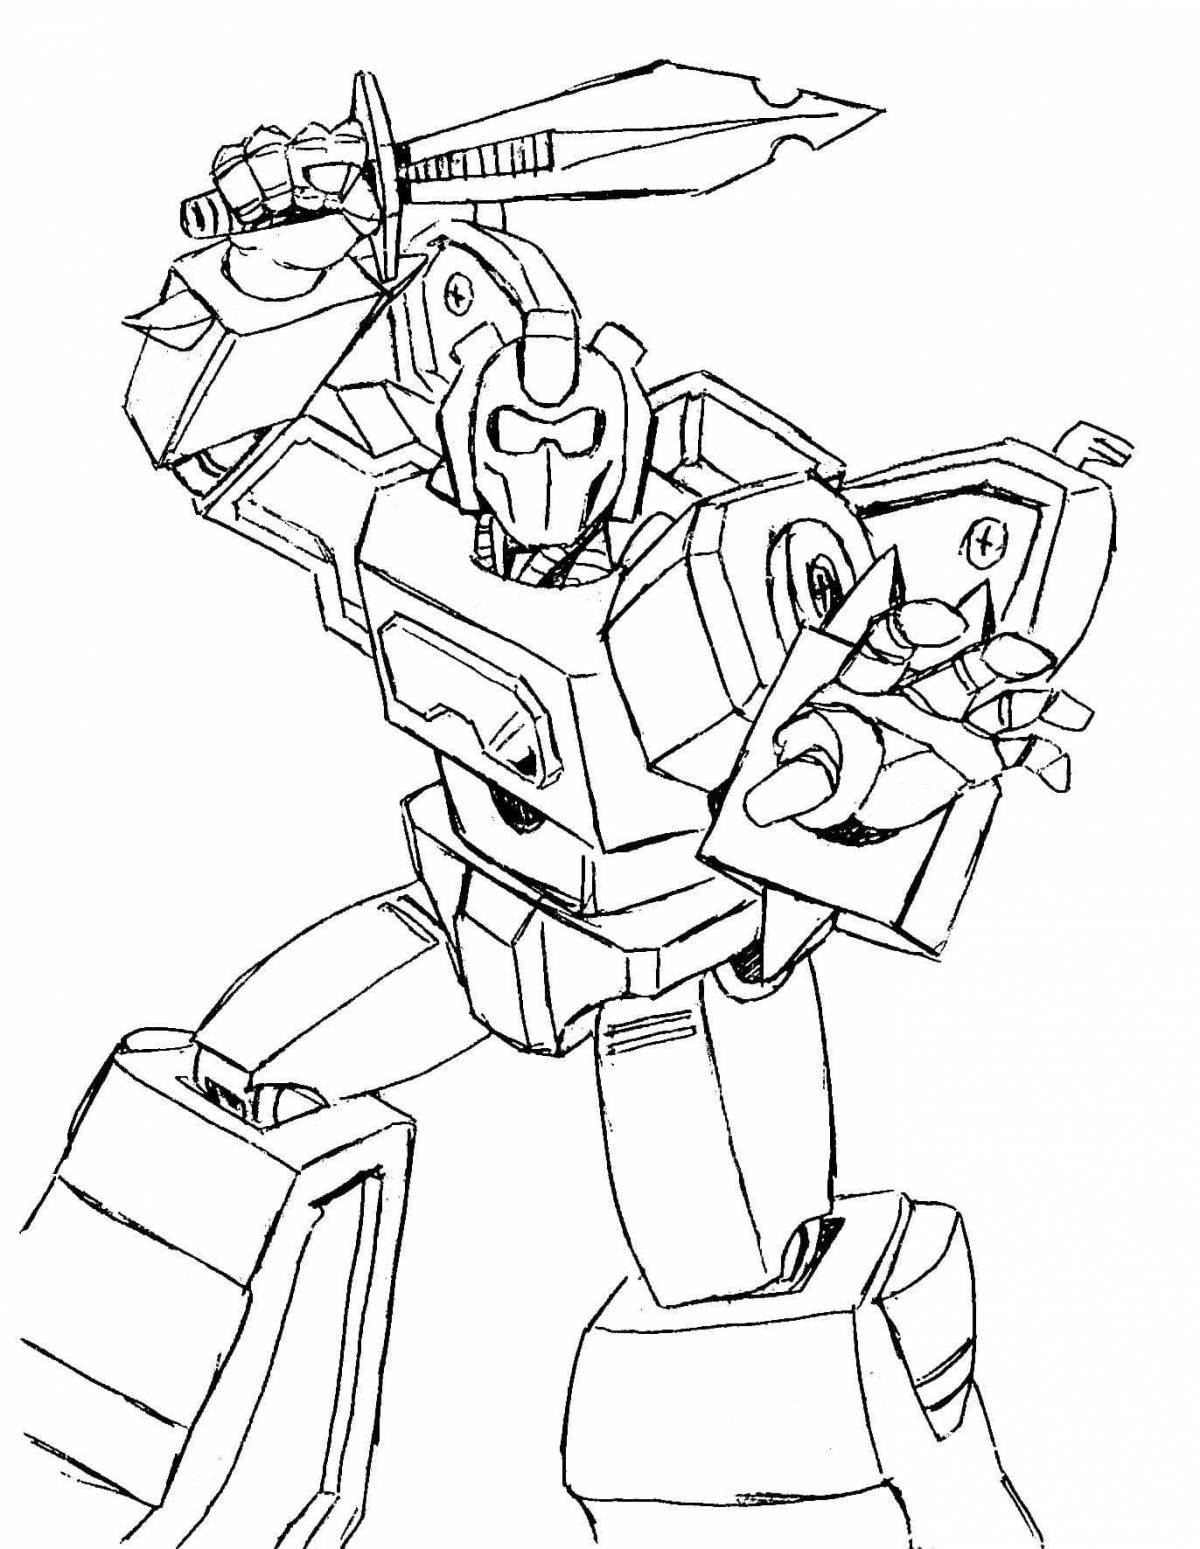 Playful transformers coloring page for kids